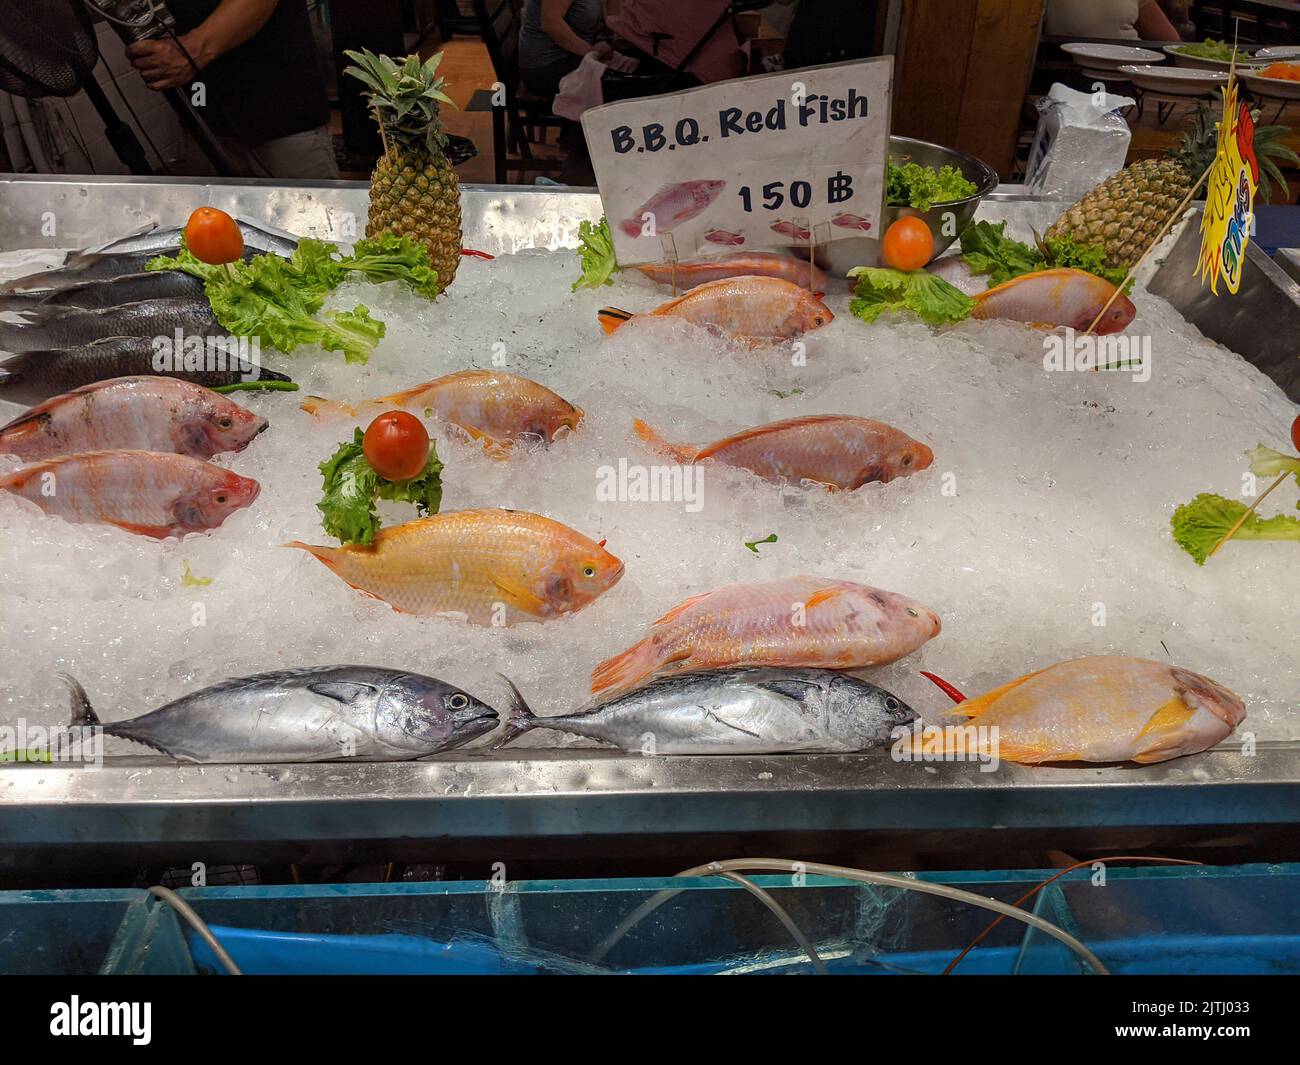 Fish and other seafood for sale at a market stall, Phuket, Thailand Stock Photo